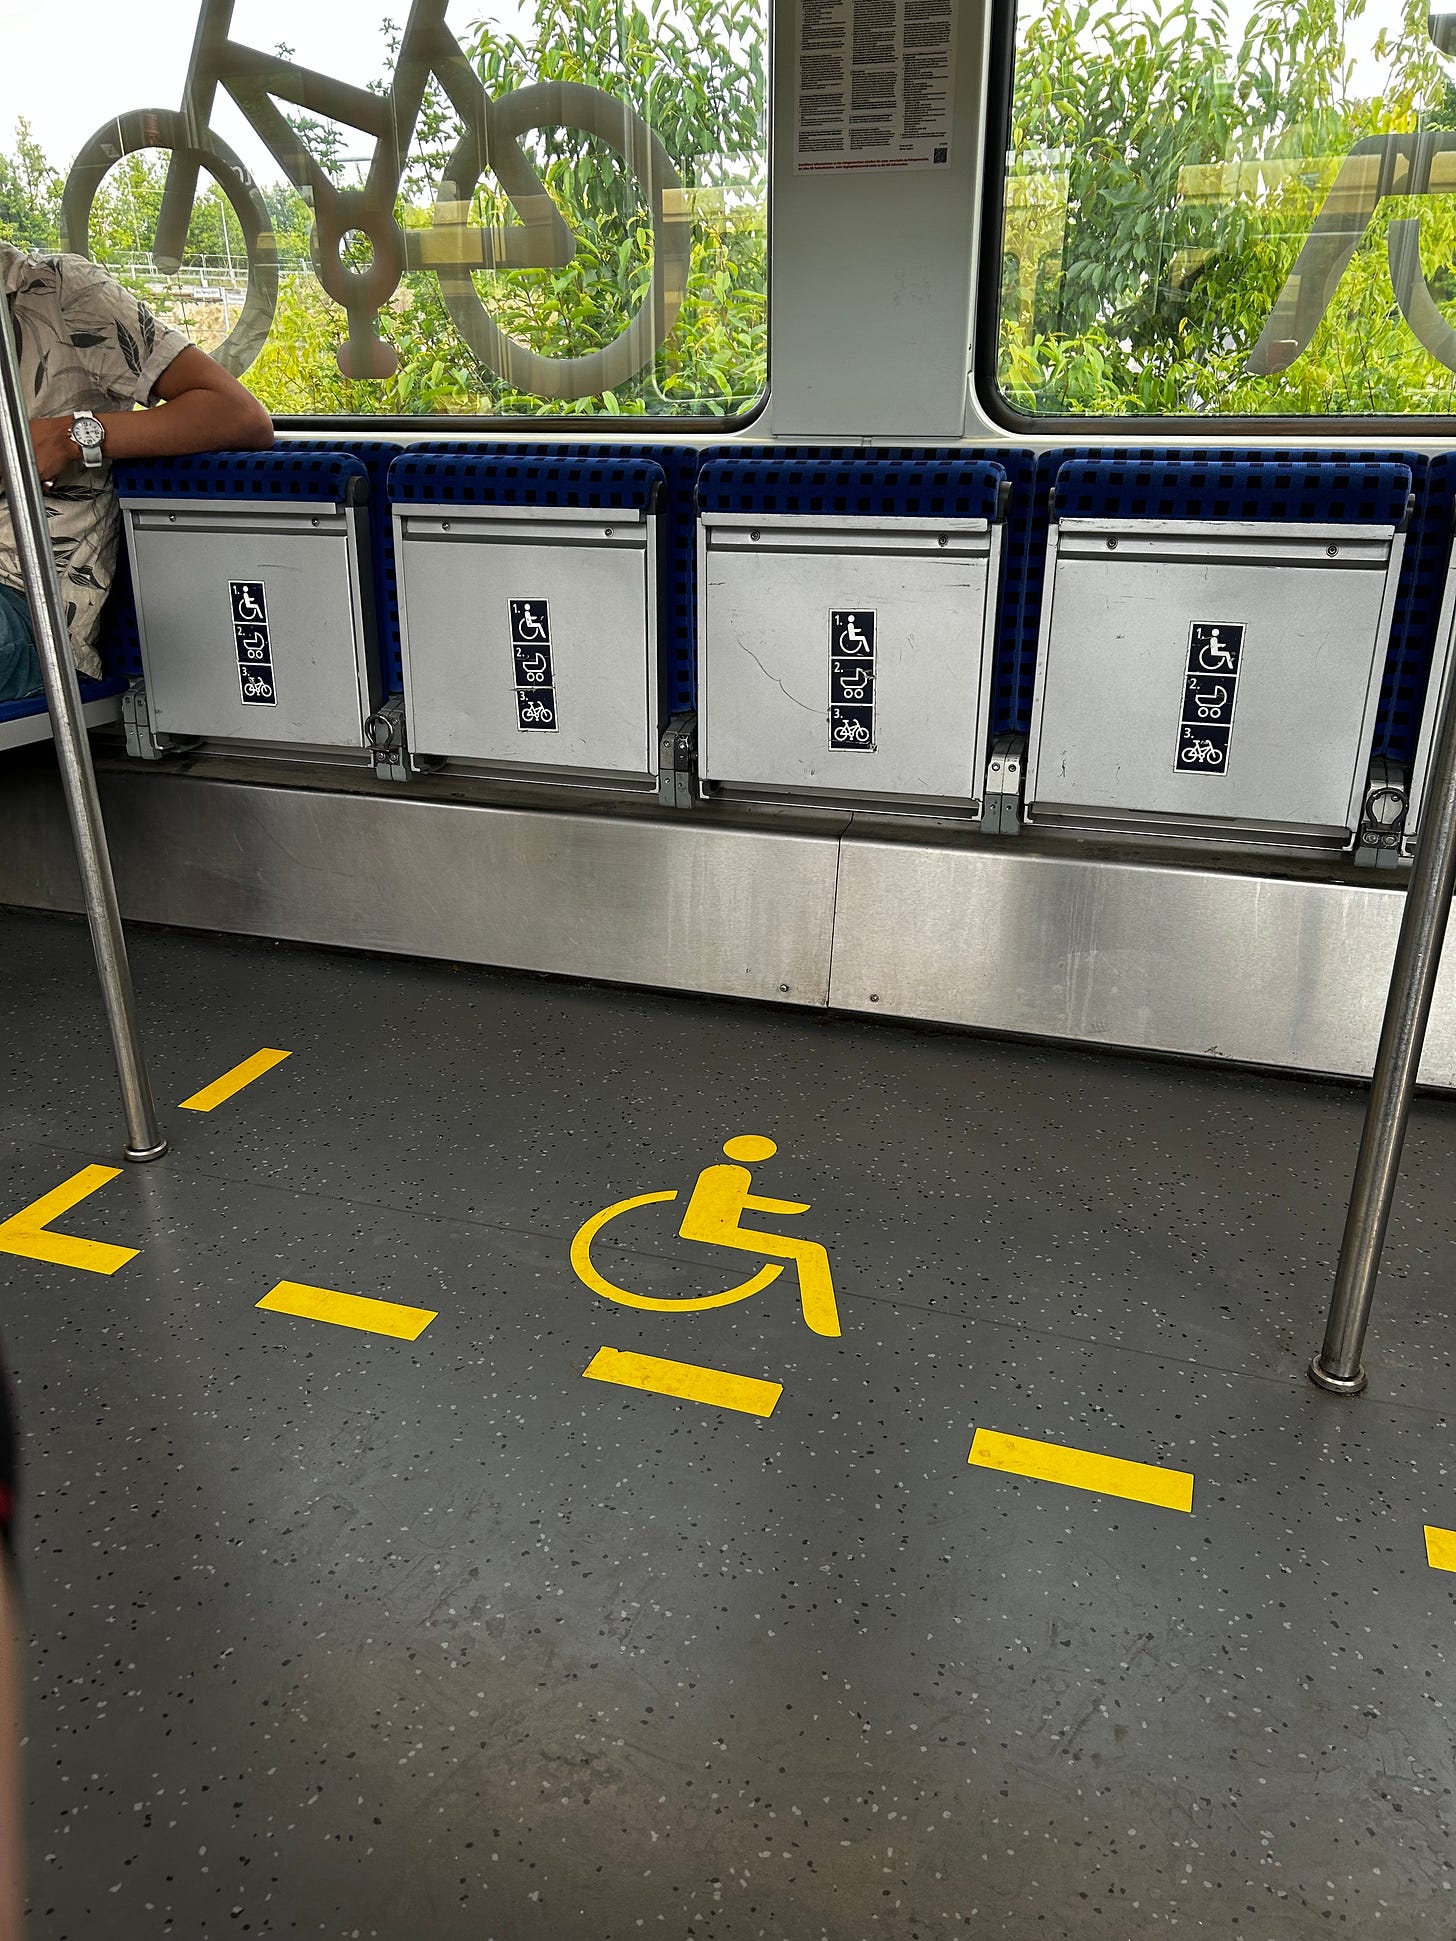 Wheelchair space marked in yellow on the floor, poles in the middle